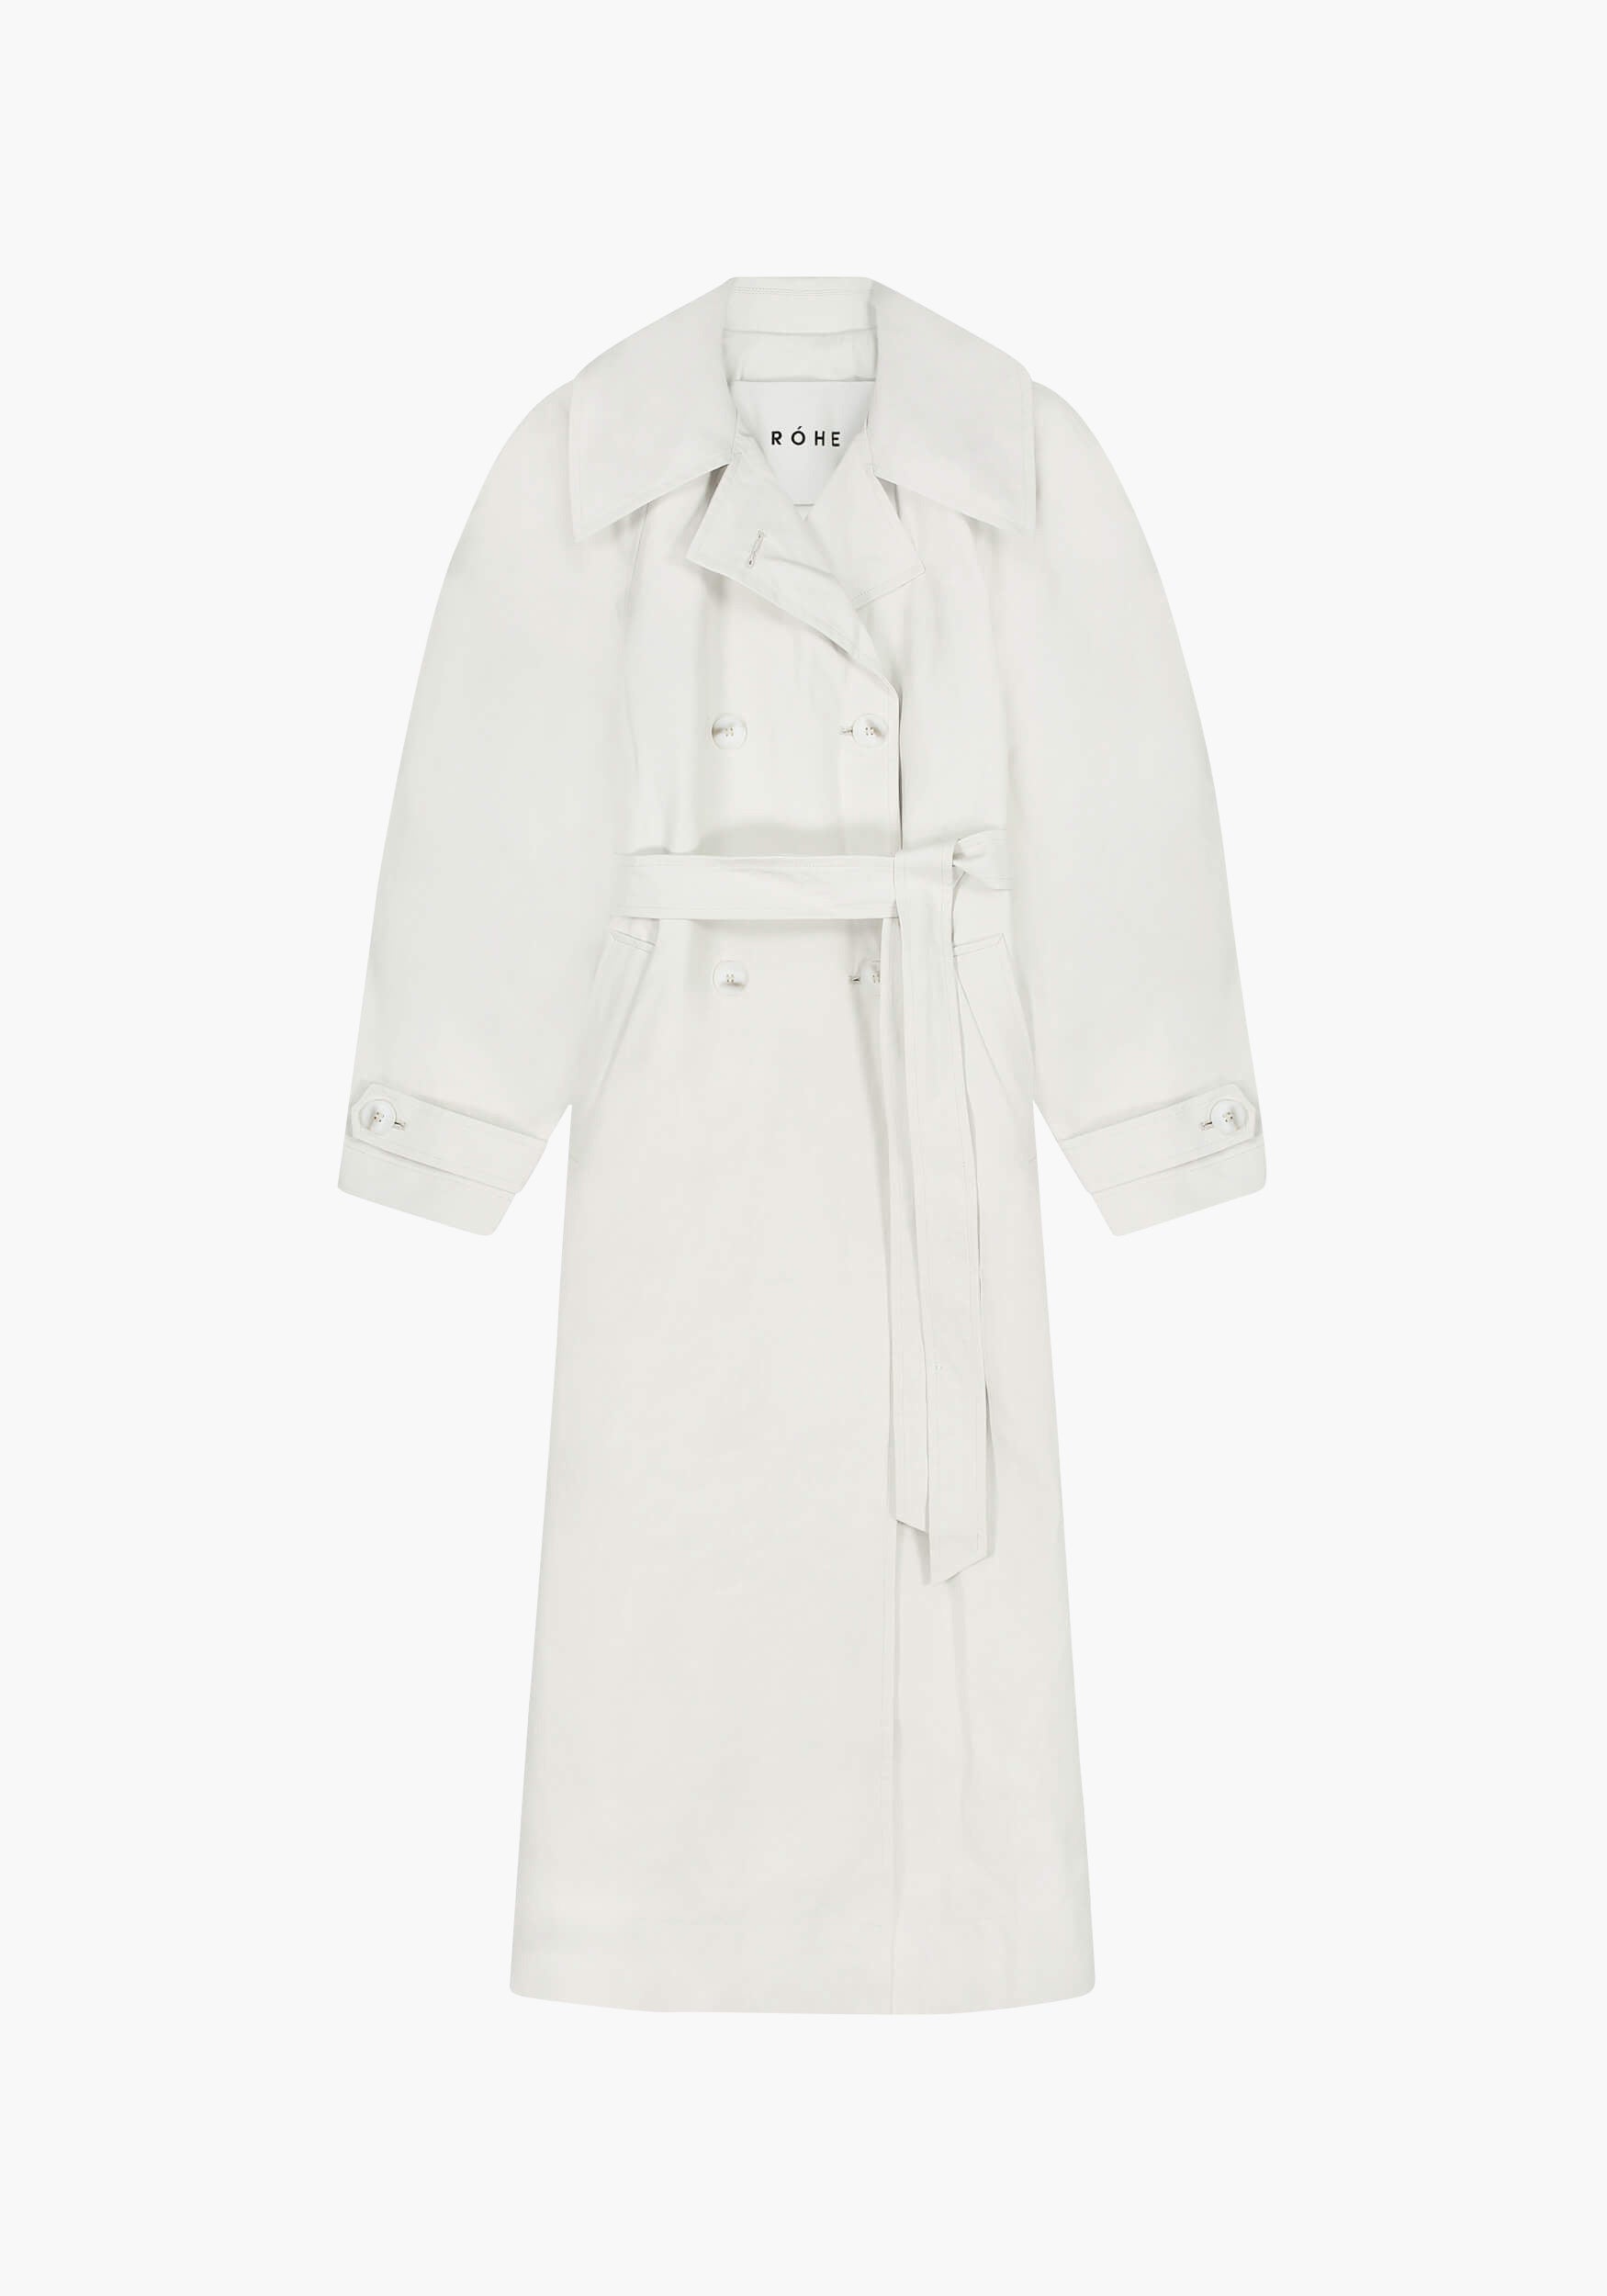 ROHÉ Coated Linen Trench Coat in Chalk available at The New Trend